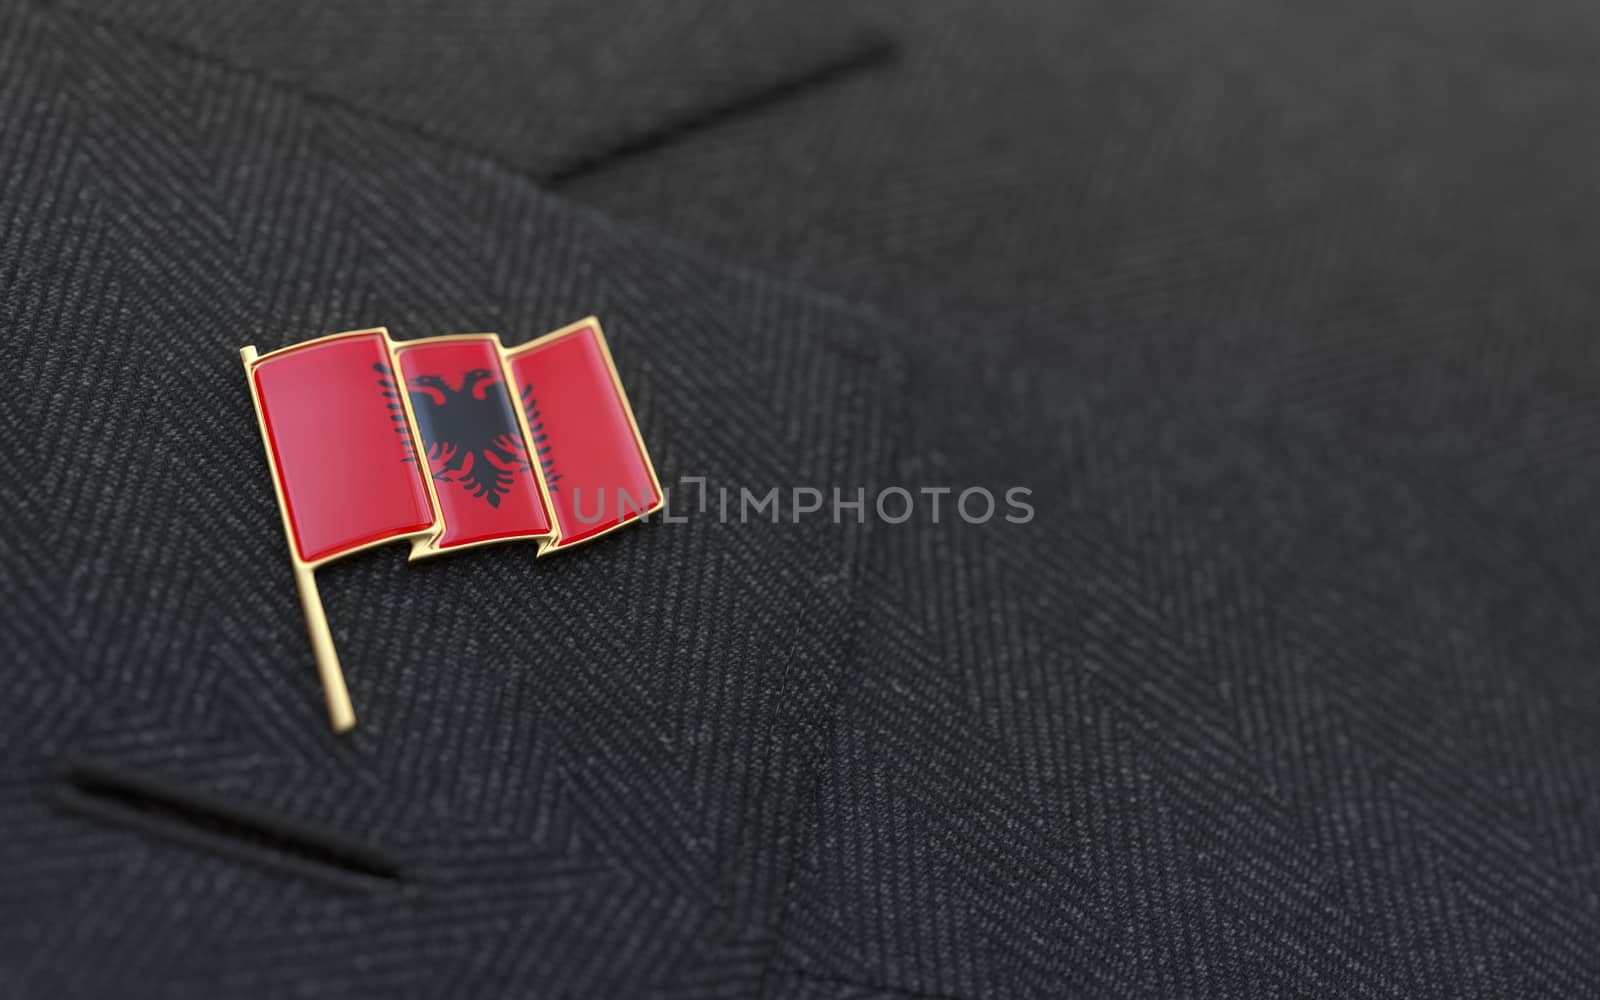 Albania flag lapel pin on the collar of a business suit jacket shows patriotism